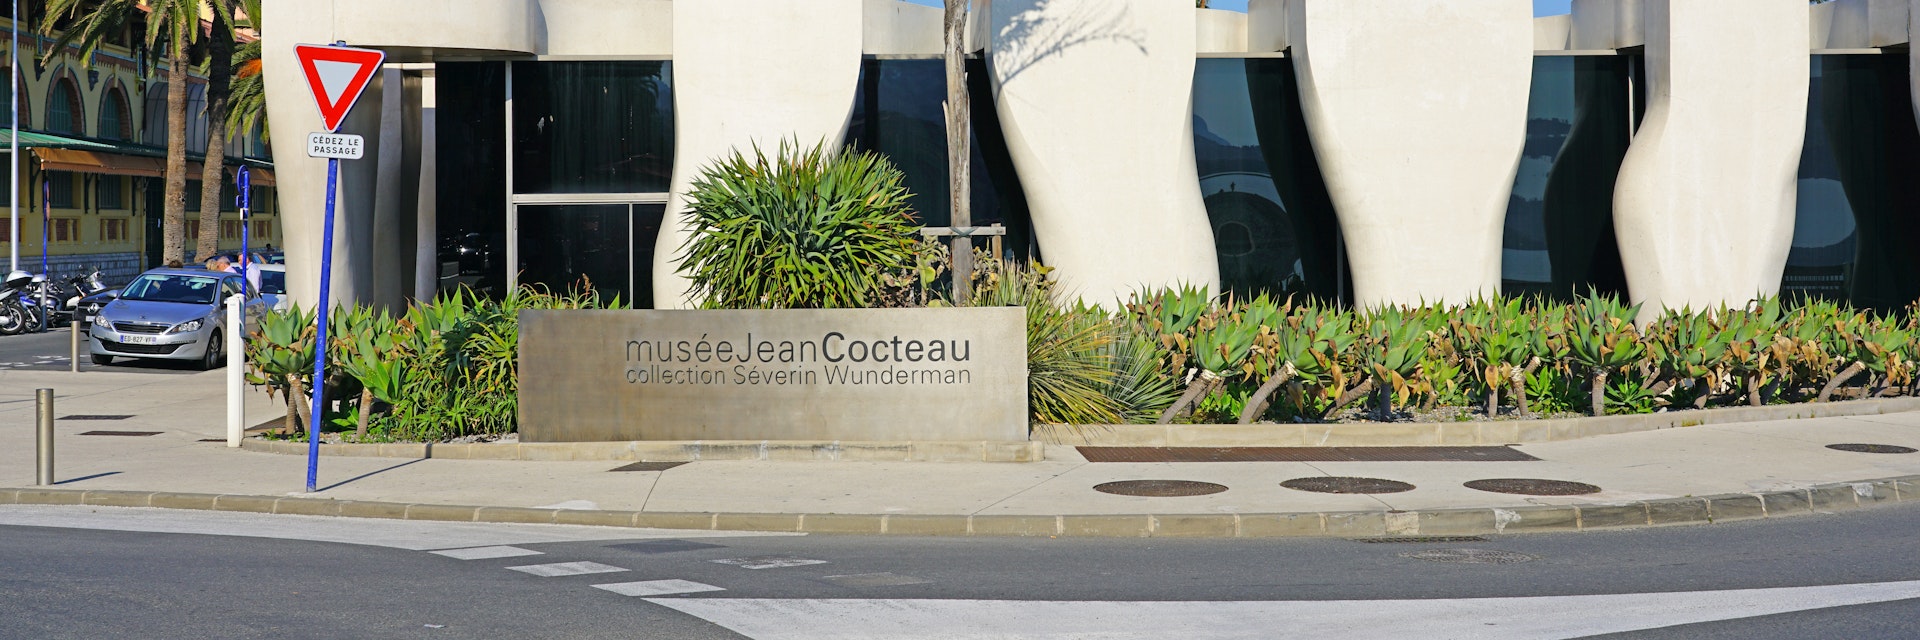 The Musee Jean Cocteau Séverin Wunderman Collection in Menton, France.